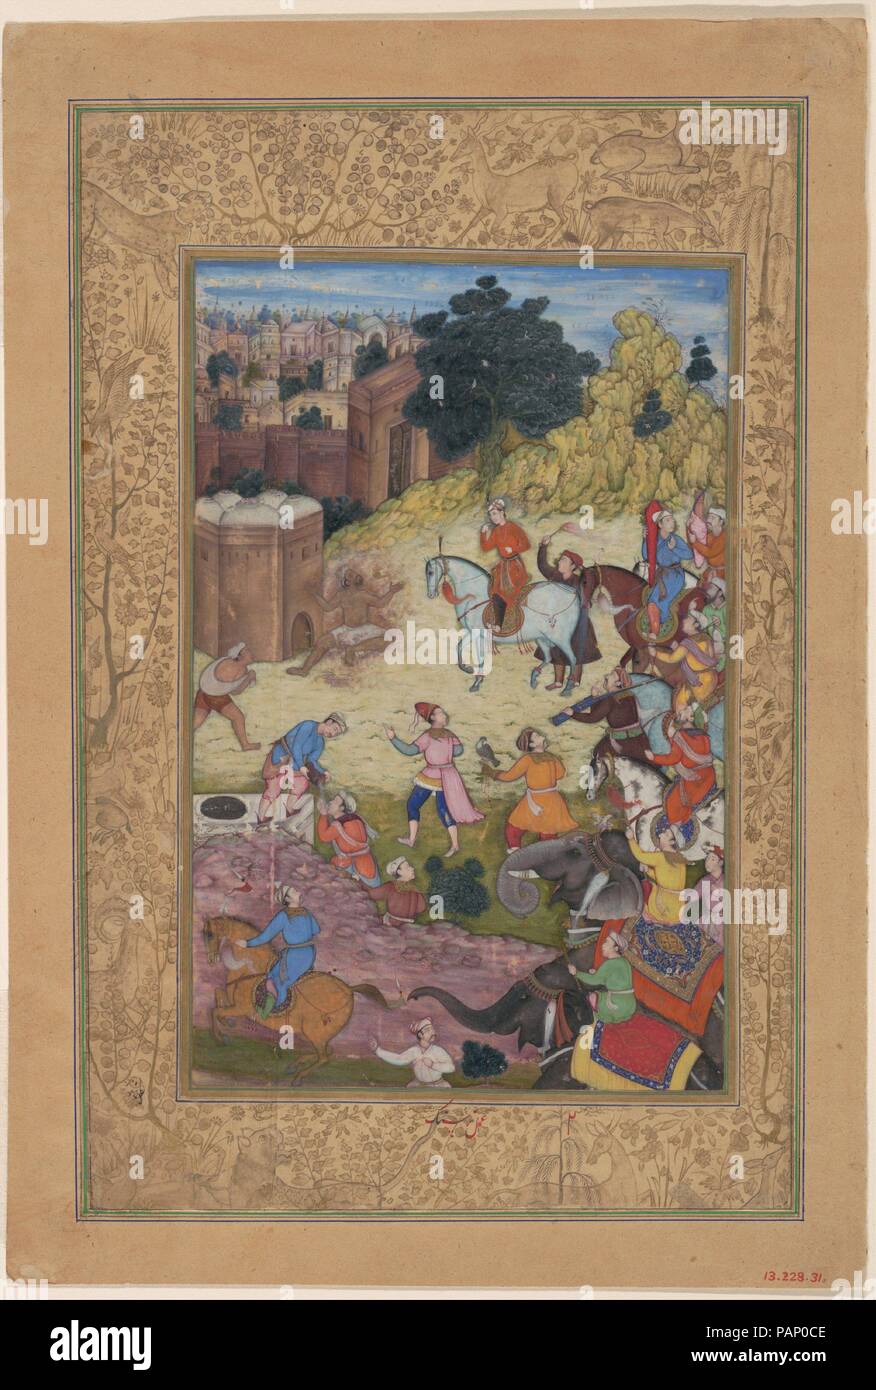 'A Bathhouse Keeper is Consumed by Passion for his Beloved', Folio from a Khamsa (Quintet) of Amir Khusrau Dihlavi. Artist: Painted by Nar Singh. Dimensions: Image: H. 10 in. (25.4 cm)   W. 6 1/2 in. (16.5 cm)  Page: H. 11 1/4 in. (28.6 cm)  W. 7 7/8 in. (20 cm)  Mat: H. 19 1/4 in. (48.9 cm)   W. 14 1/4 in. (36.2 cm). Poet: Amir Khusrau Dihlavi (1253-1325). Date: 1597-98.  Matla' al-Anwar (Rising of the Luminaries), the first poem of Amir Khusrau Dihlavi's Quintet, is comprised of 3310 verses compiled approximately in twenty Maqalat (didactic discourses). Matla' al-Anwar is a response by Amir  Stock Photo